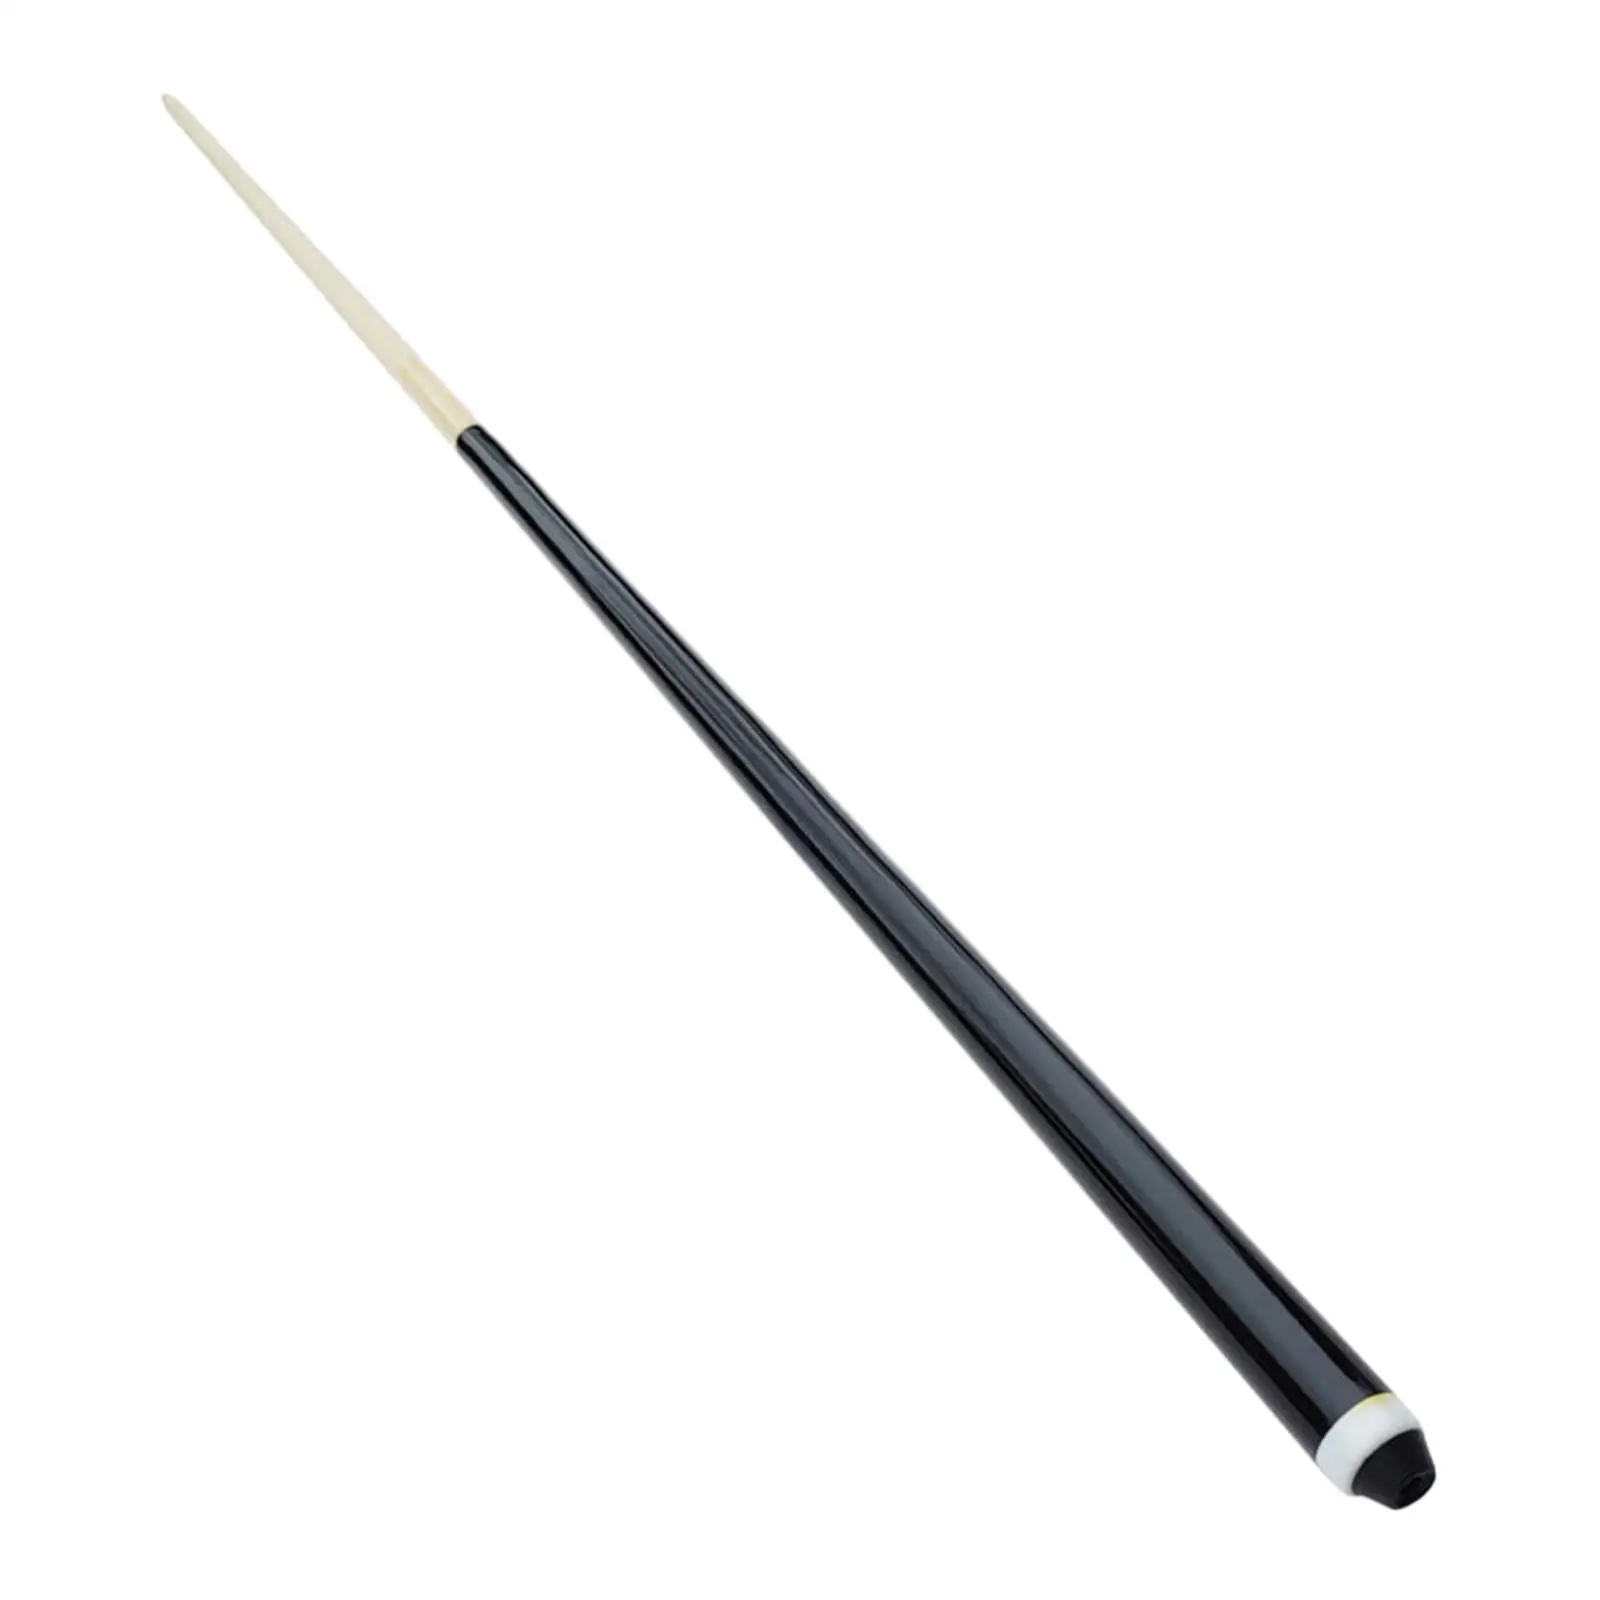 Billiard Pool Cue Stick Billiards Cue Rest Pool Stick Durable Pool Table Sticks for Game Snooker Competition Training Accessory